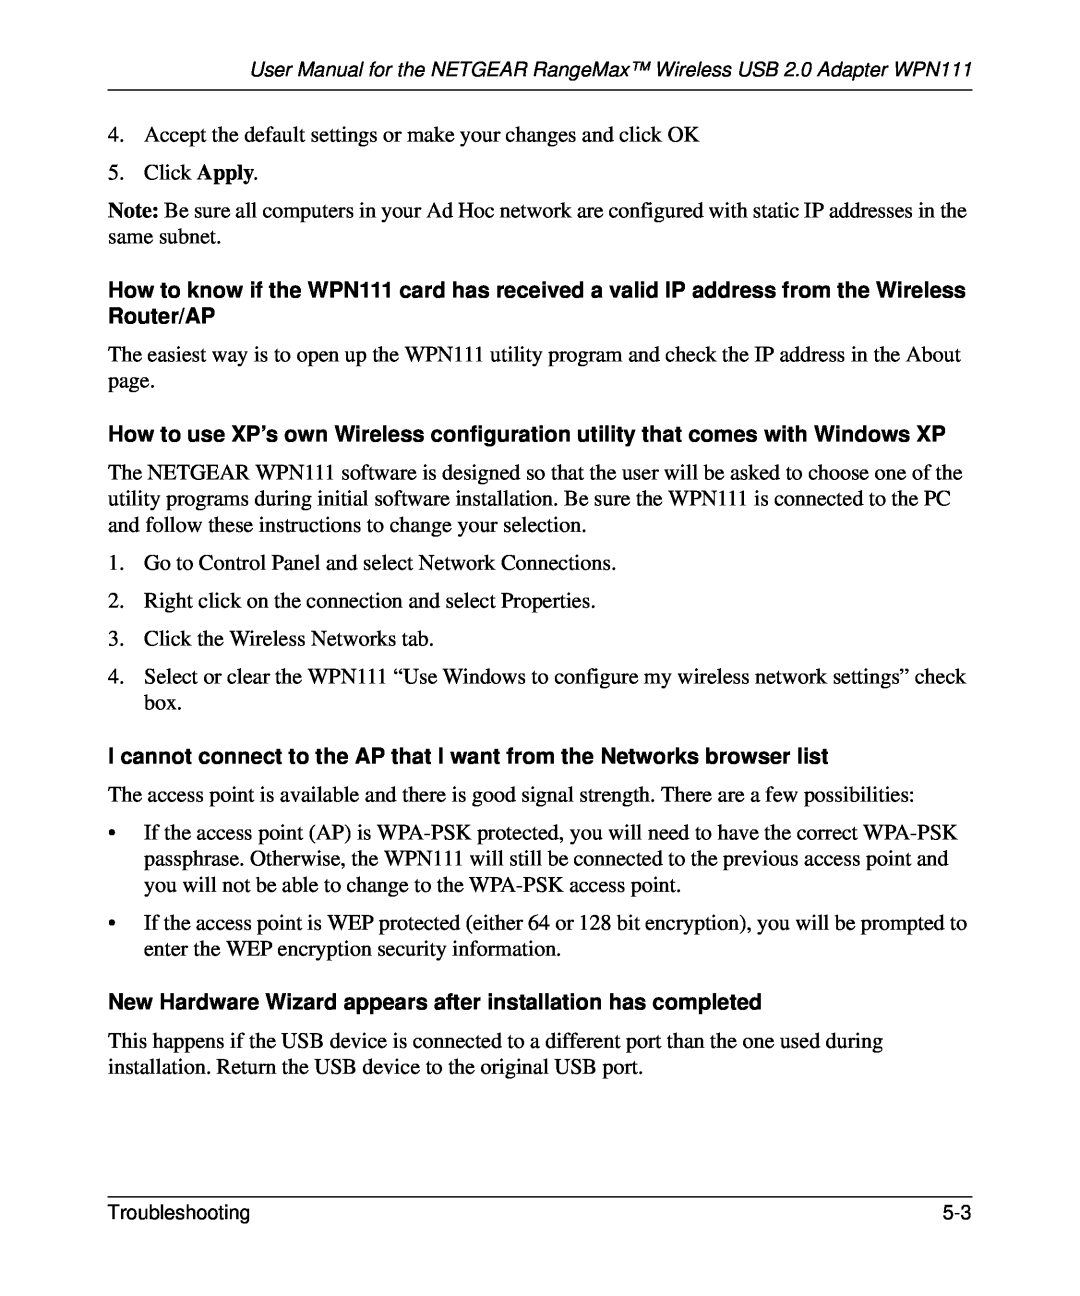 NETGEAR WPN111 user manual I cannot connect to the AP that I want from the Networks browser list 